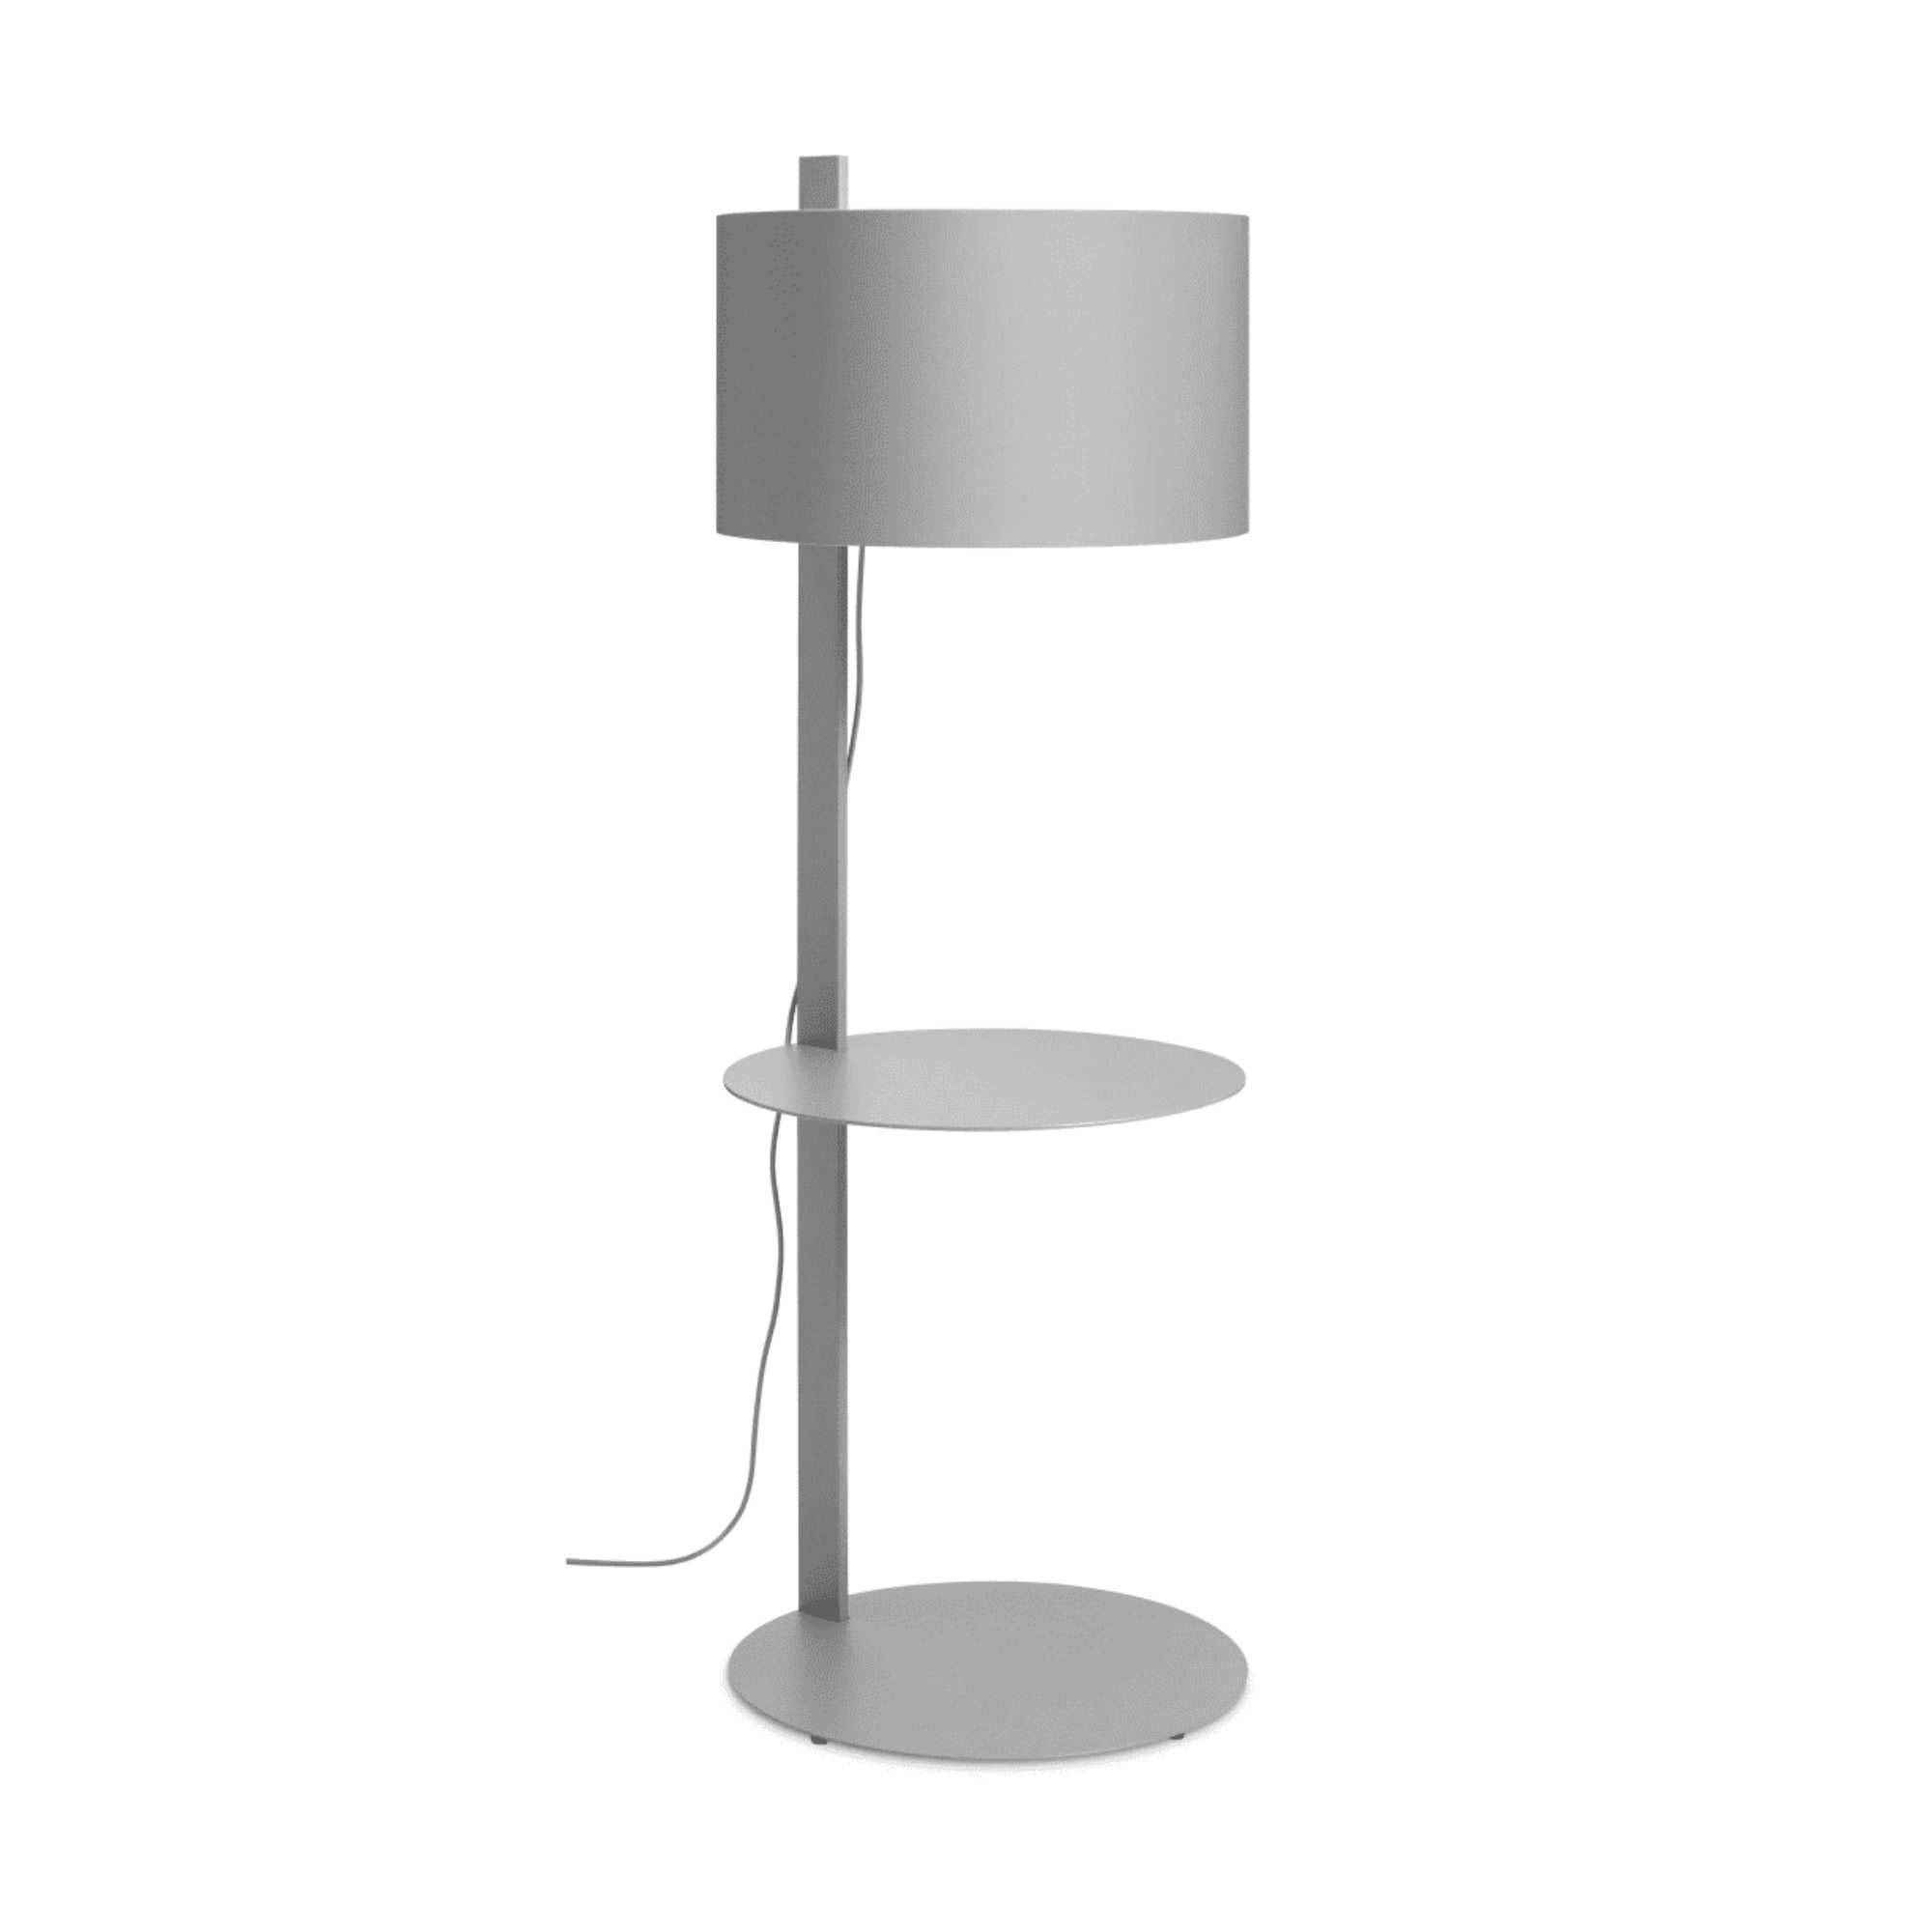 Blu Dot Note Large floor lamp with table, light grey